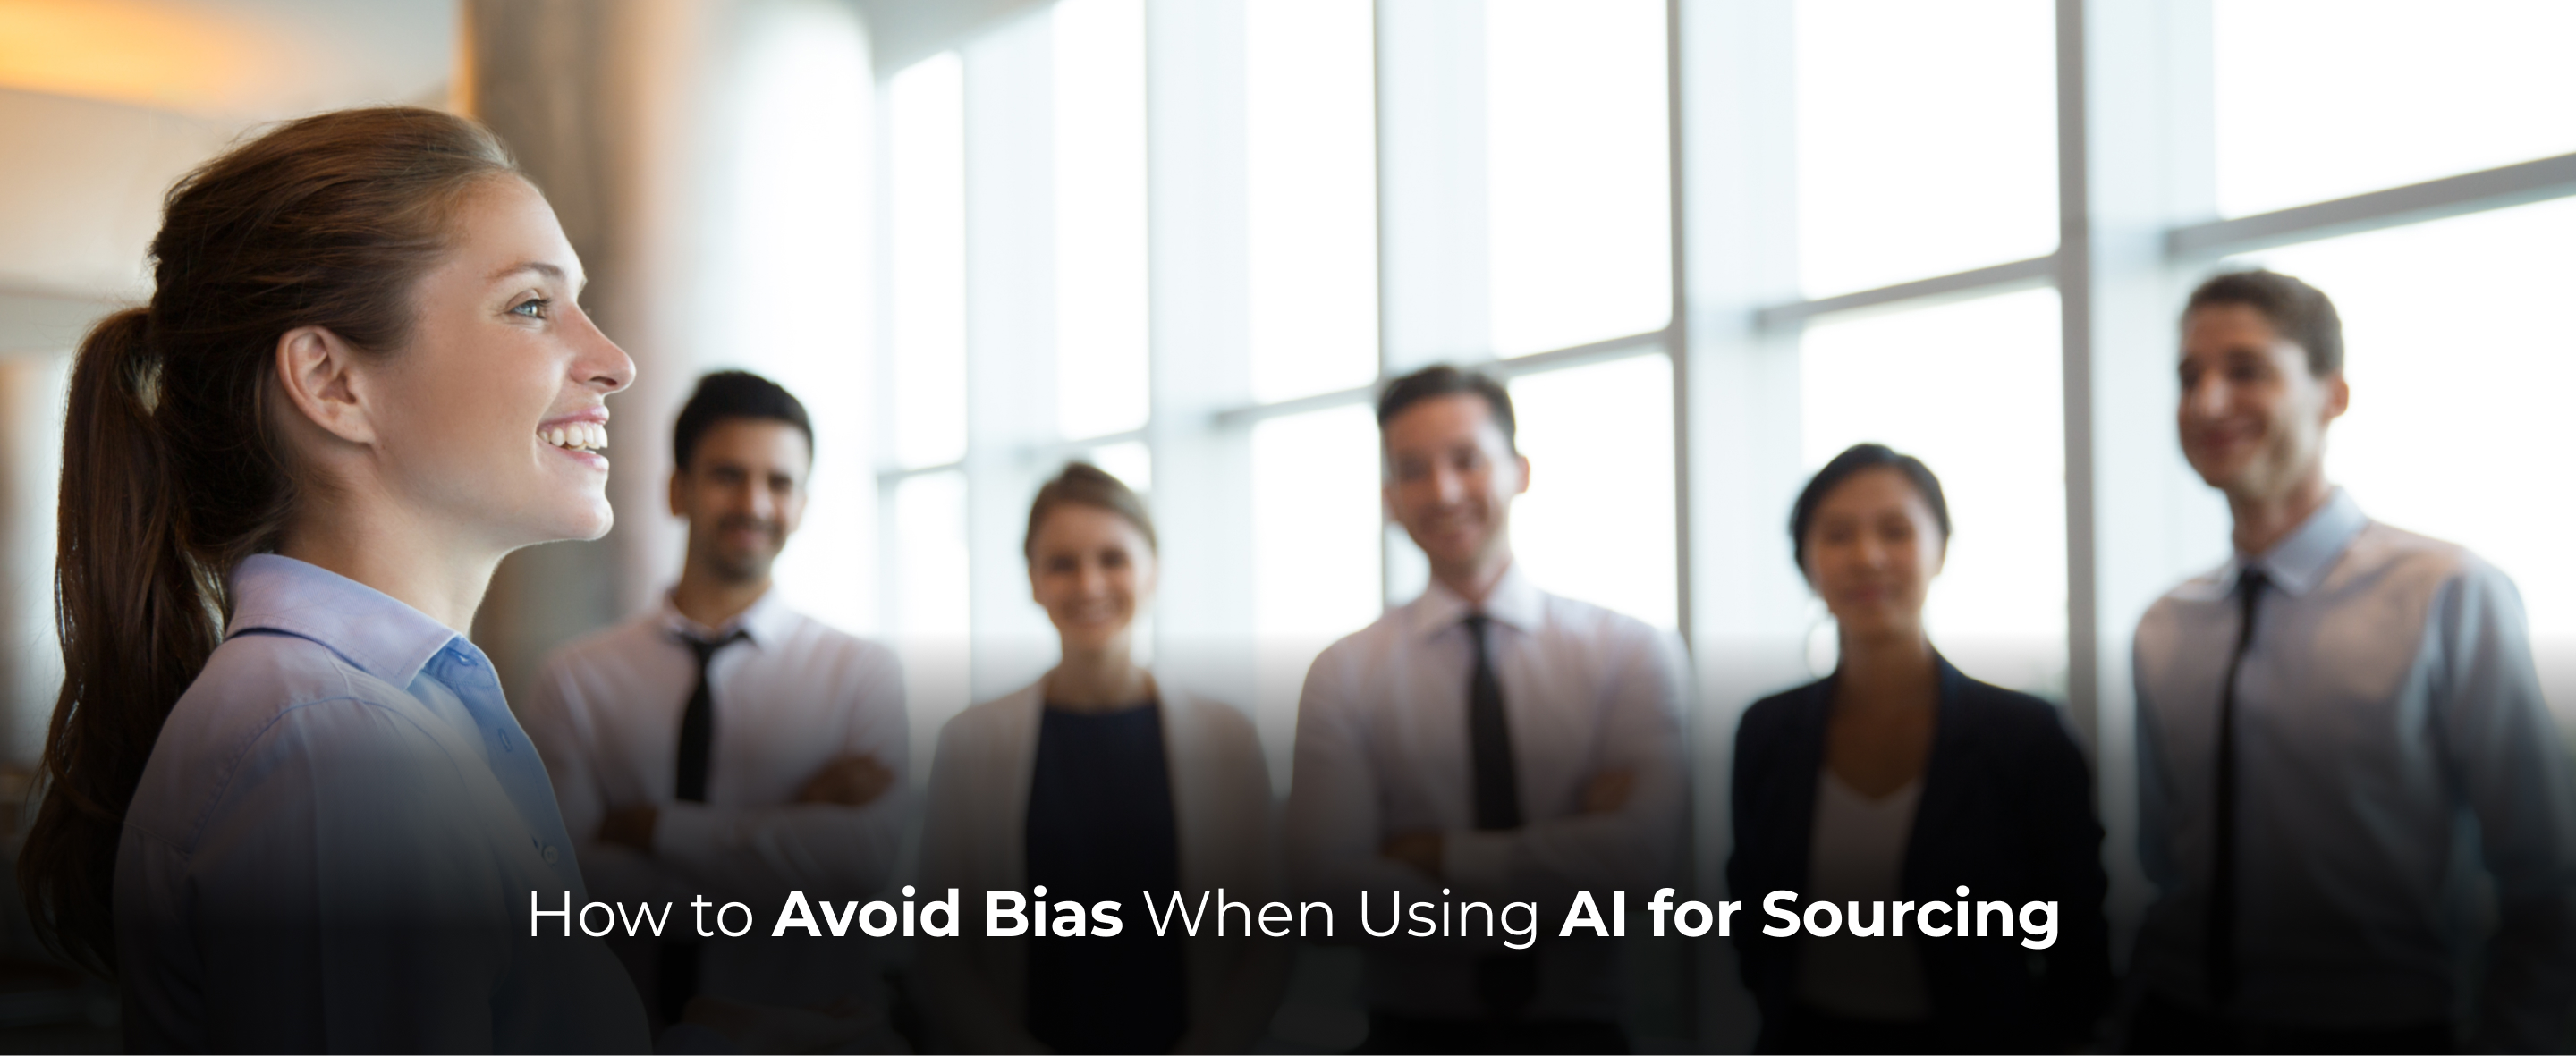 How to Avoid Bias When Using AI for Sourcing